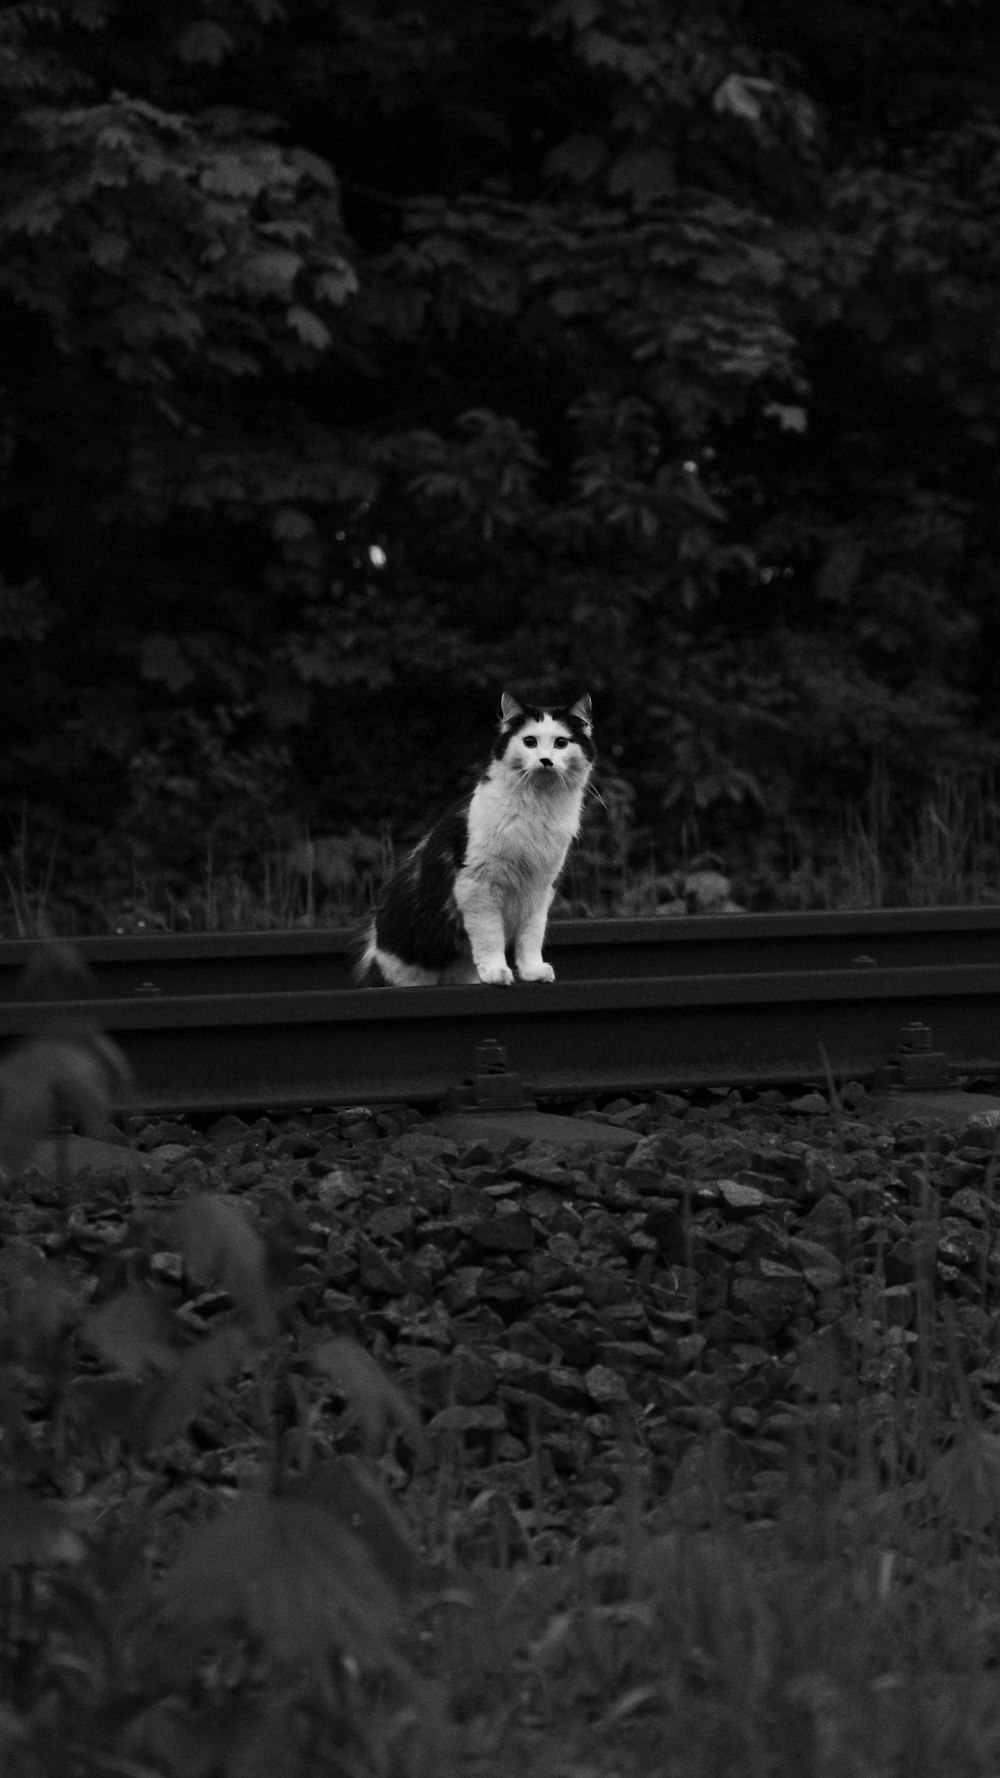 grayscale photo of dog on wooden surface